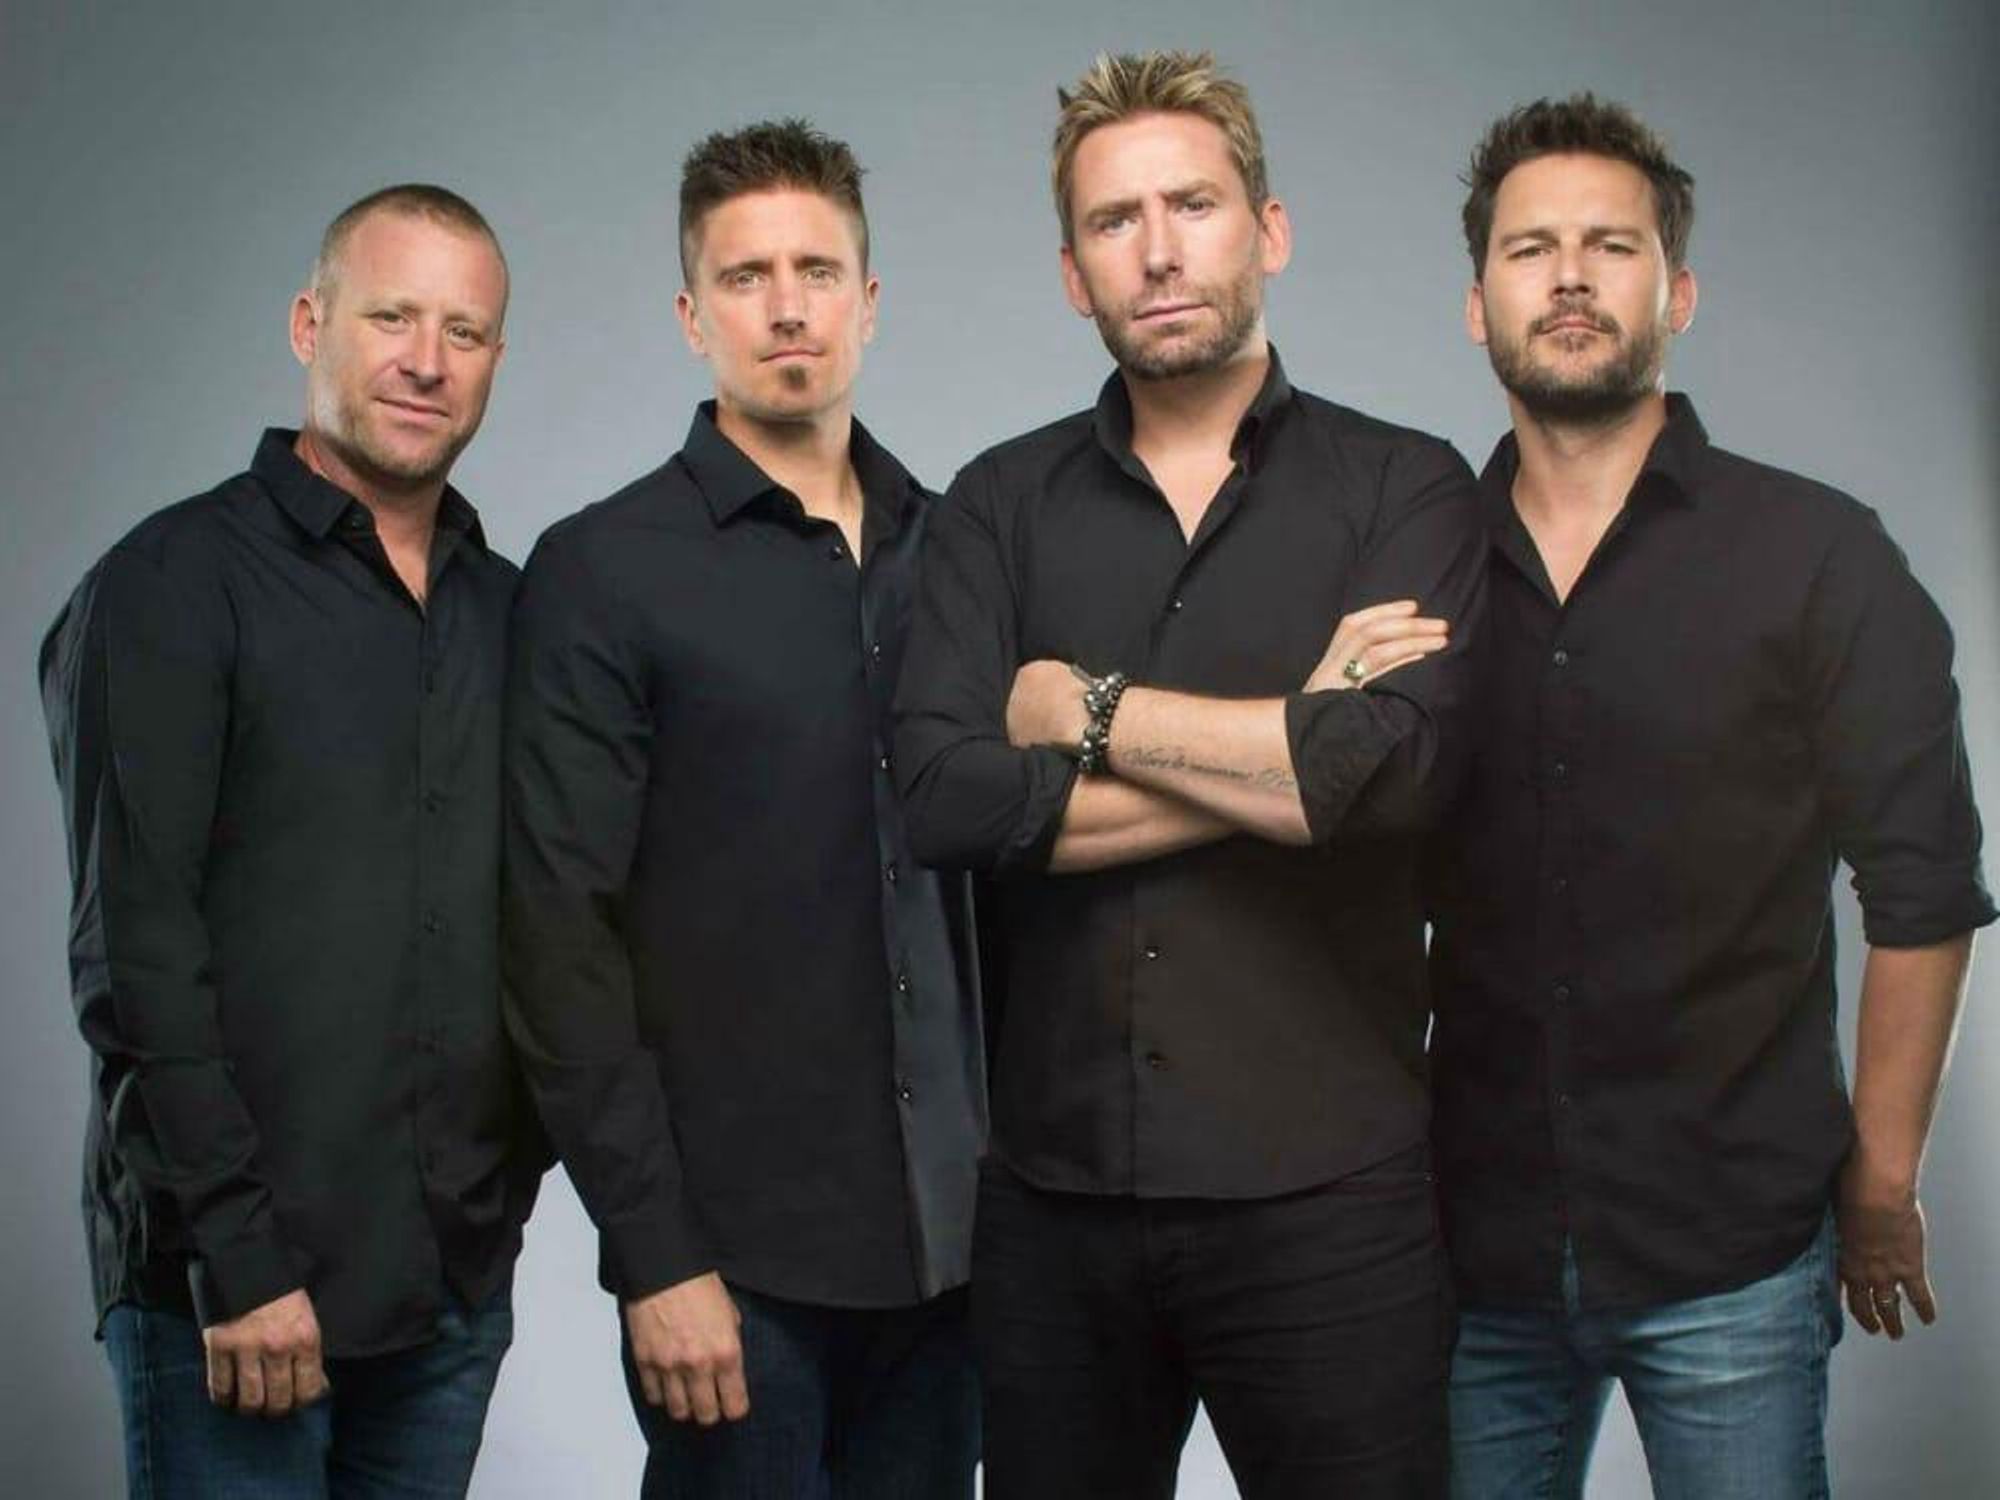 Juggernaut rock band Nickelback is touring summer 2023 with stop in Dallas  - CultureMap Dallas